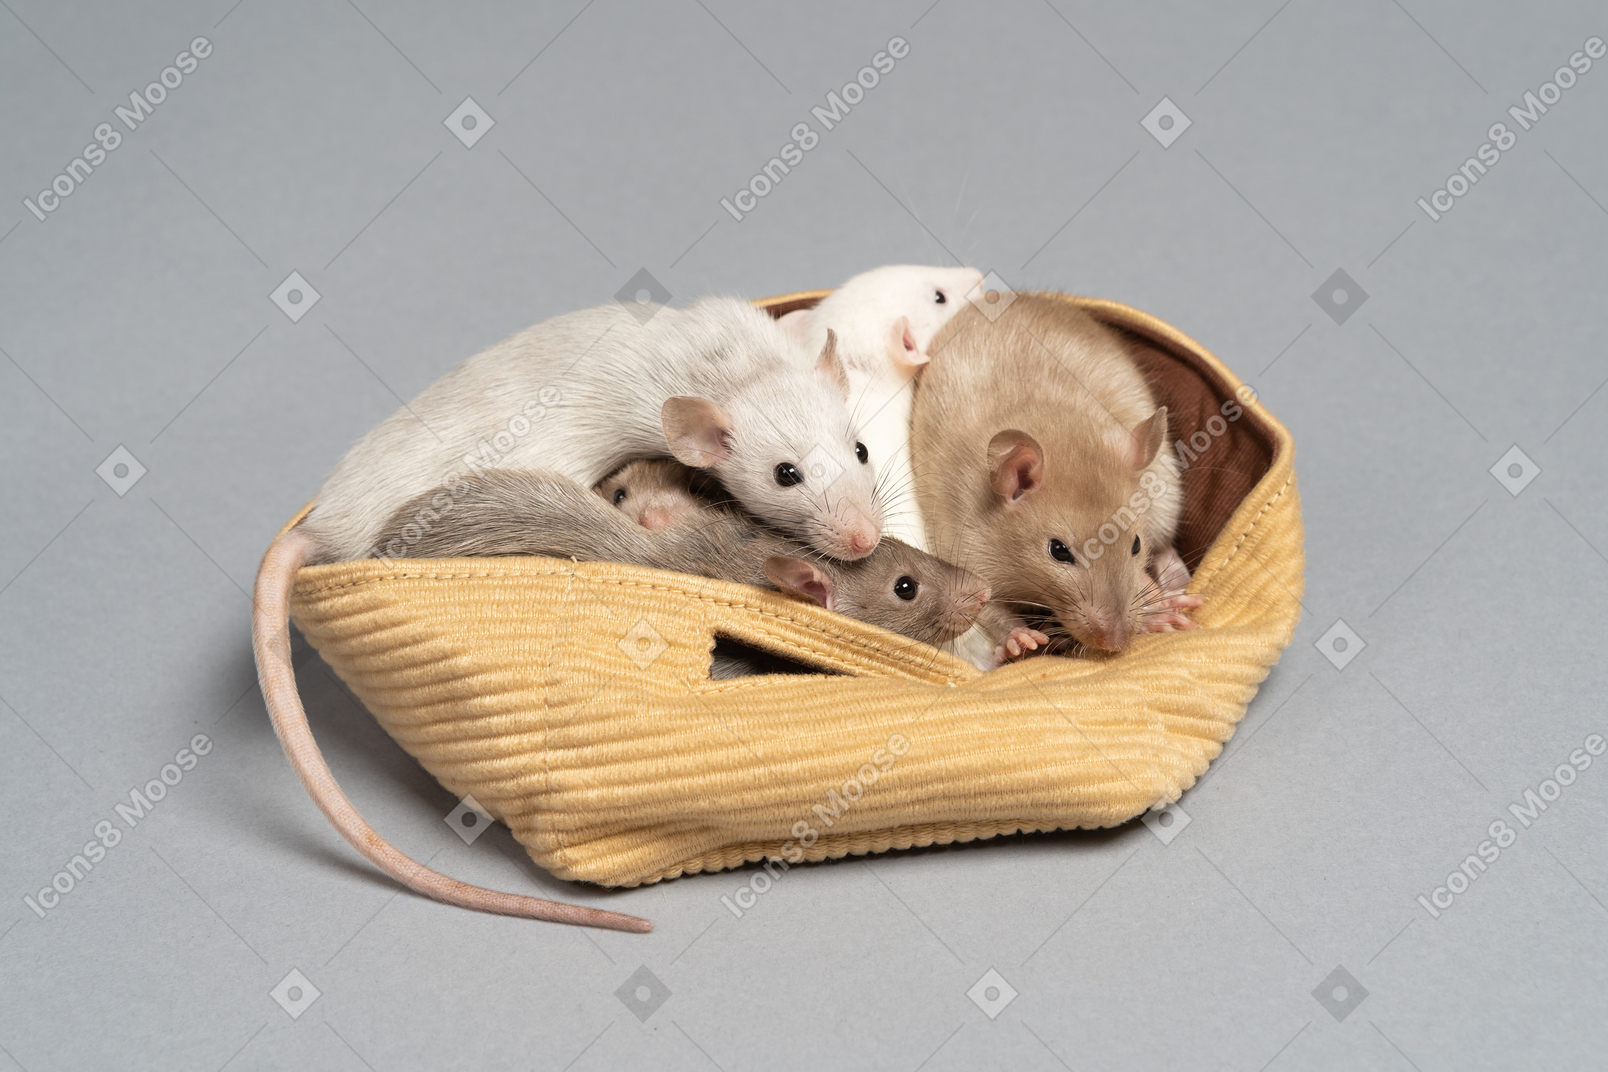 A bunch of cute mice sitting in a yellow bag